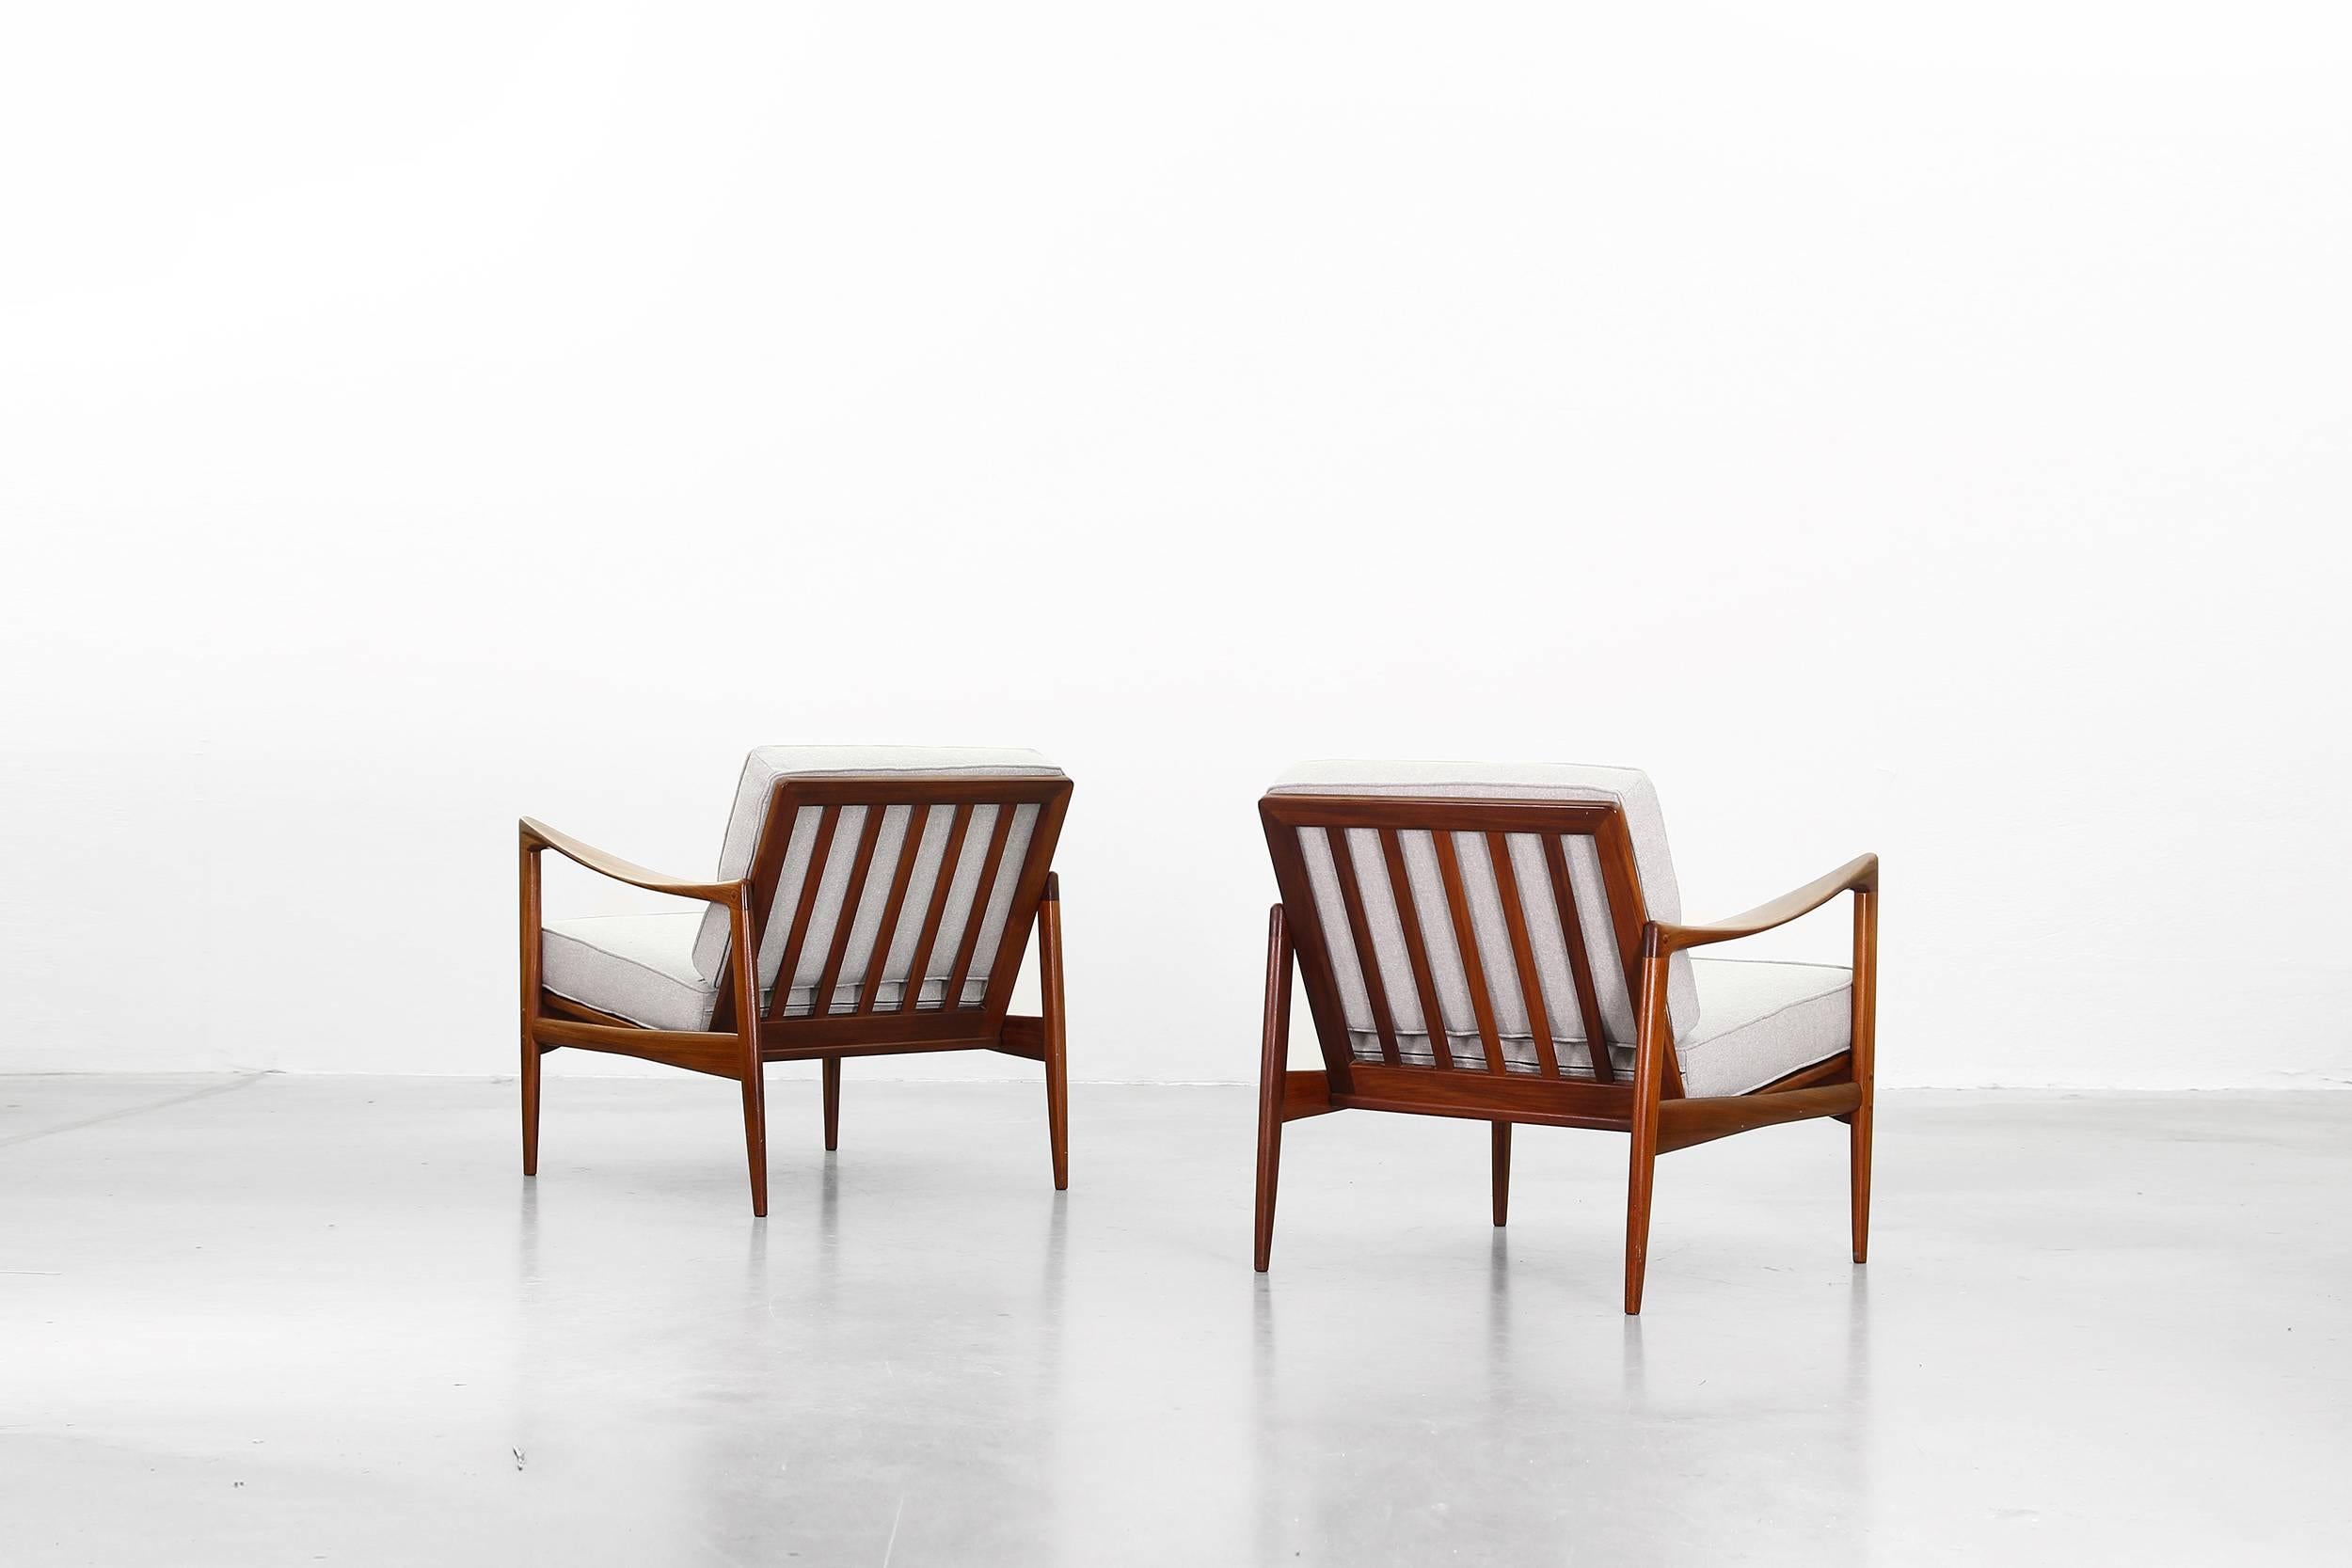 Very beautiful pair of lounge chairs designed by Ib Kofod-Larsen for OPE Møbler, Schweden.
Both chairs are in a wonderful condition with just little traces of usage. The cushions were newly reupholstered with a high quality fabric by Romo.